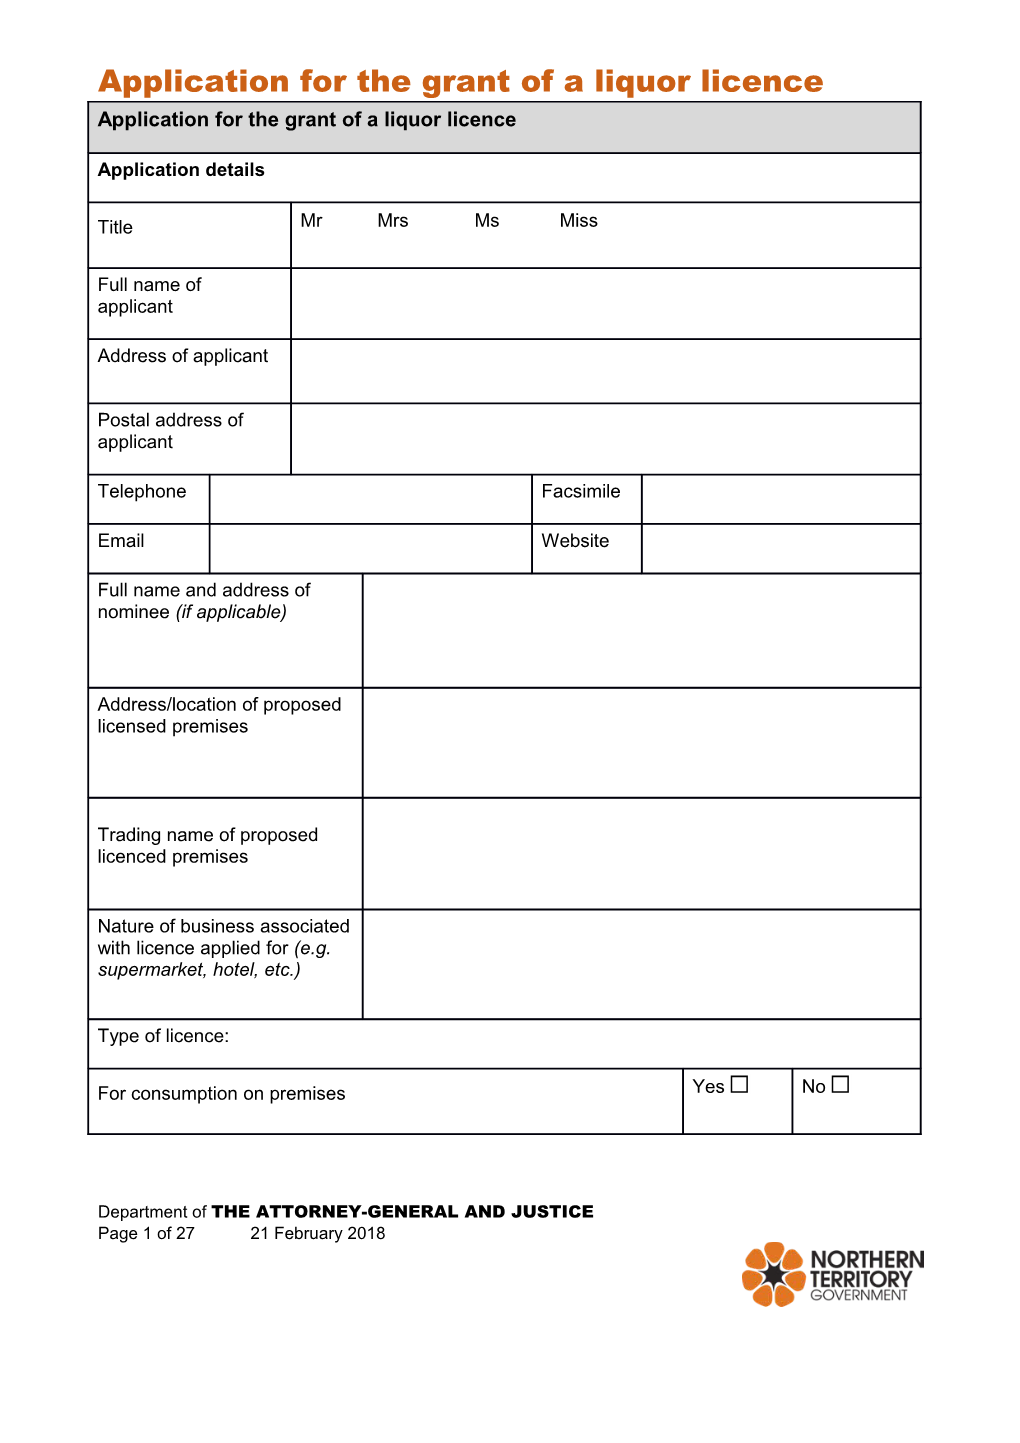 Application for the Grant of a Liquor Licence